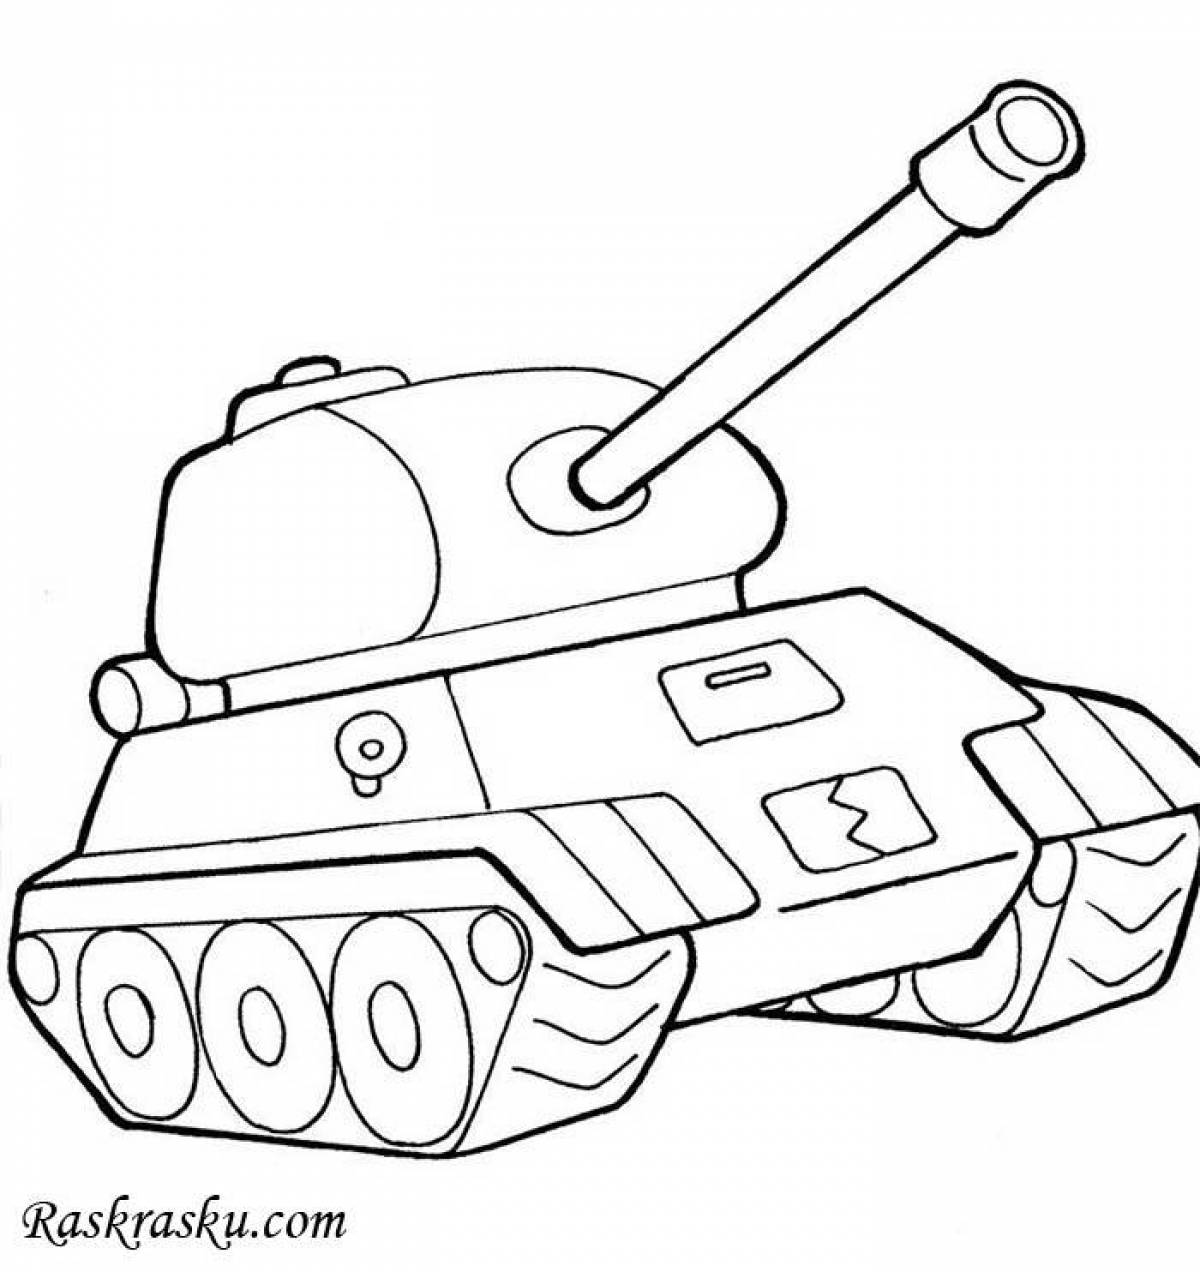 Amazing tank coloring page for kids